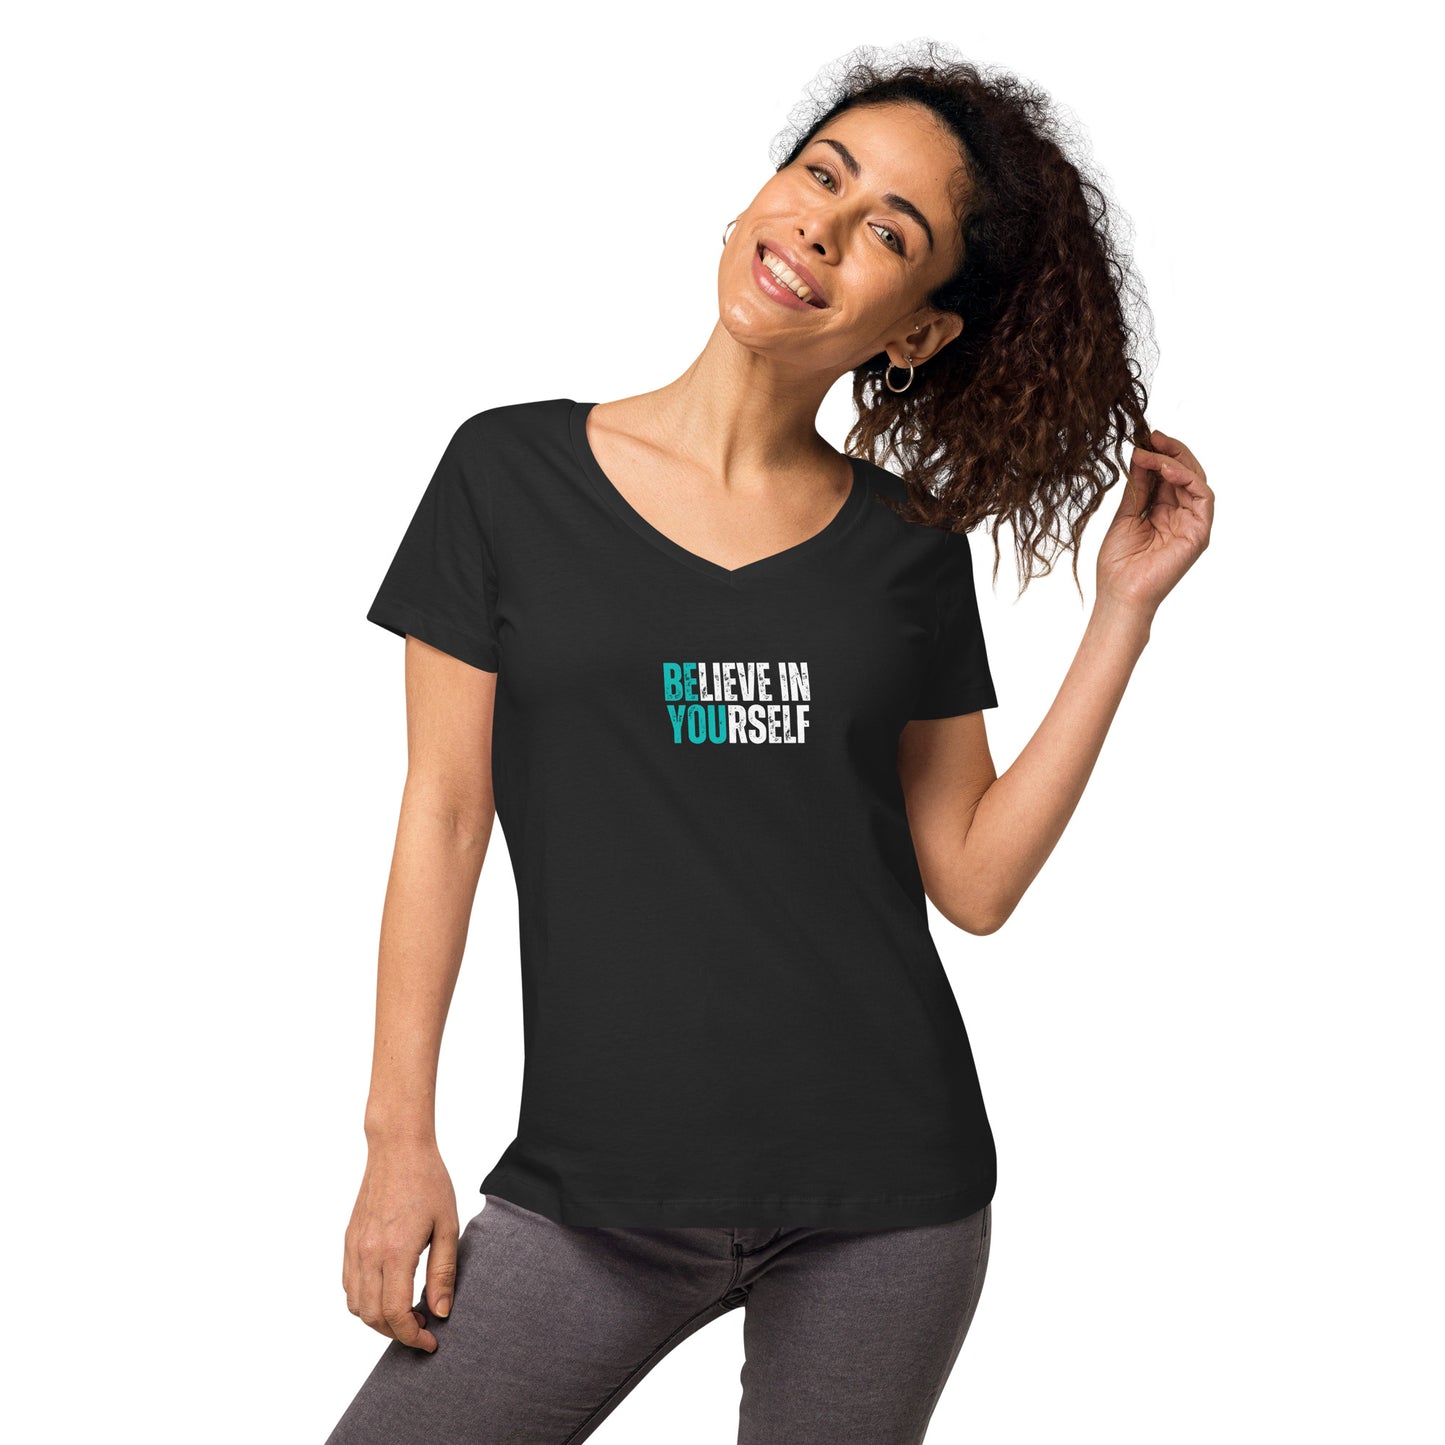 BElieve in YOUrself - Women’s fitted v-neck t-shirt